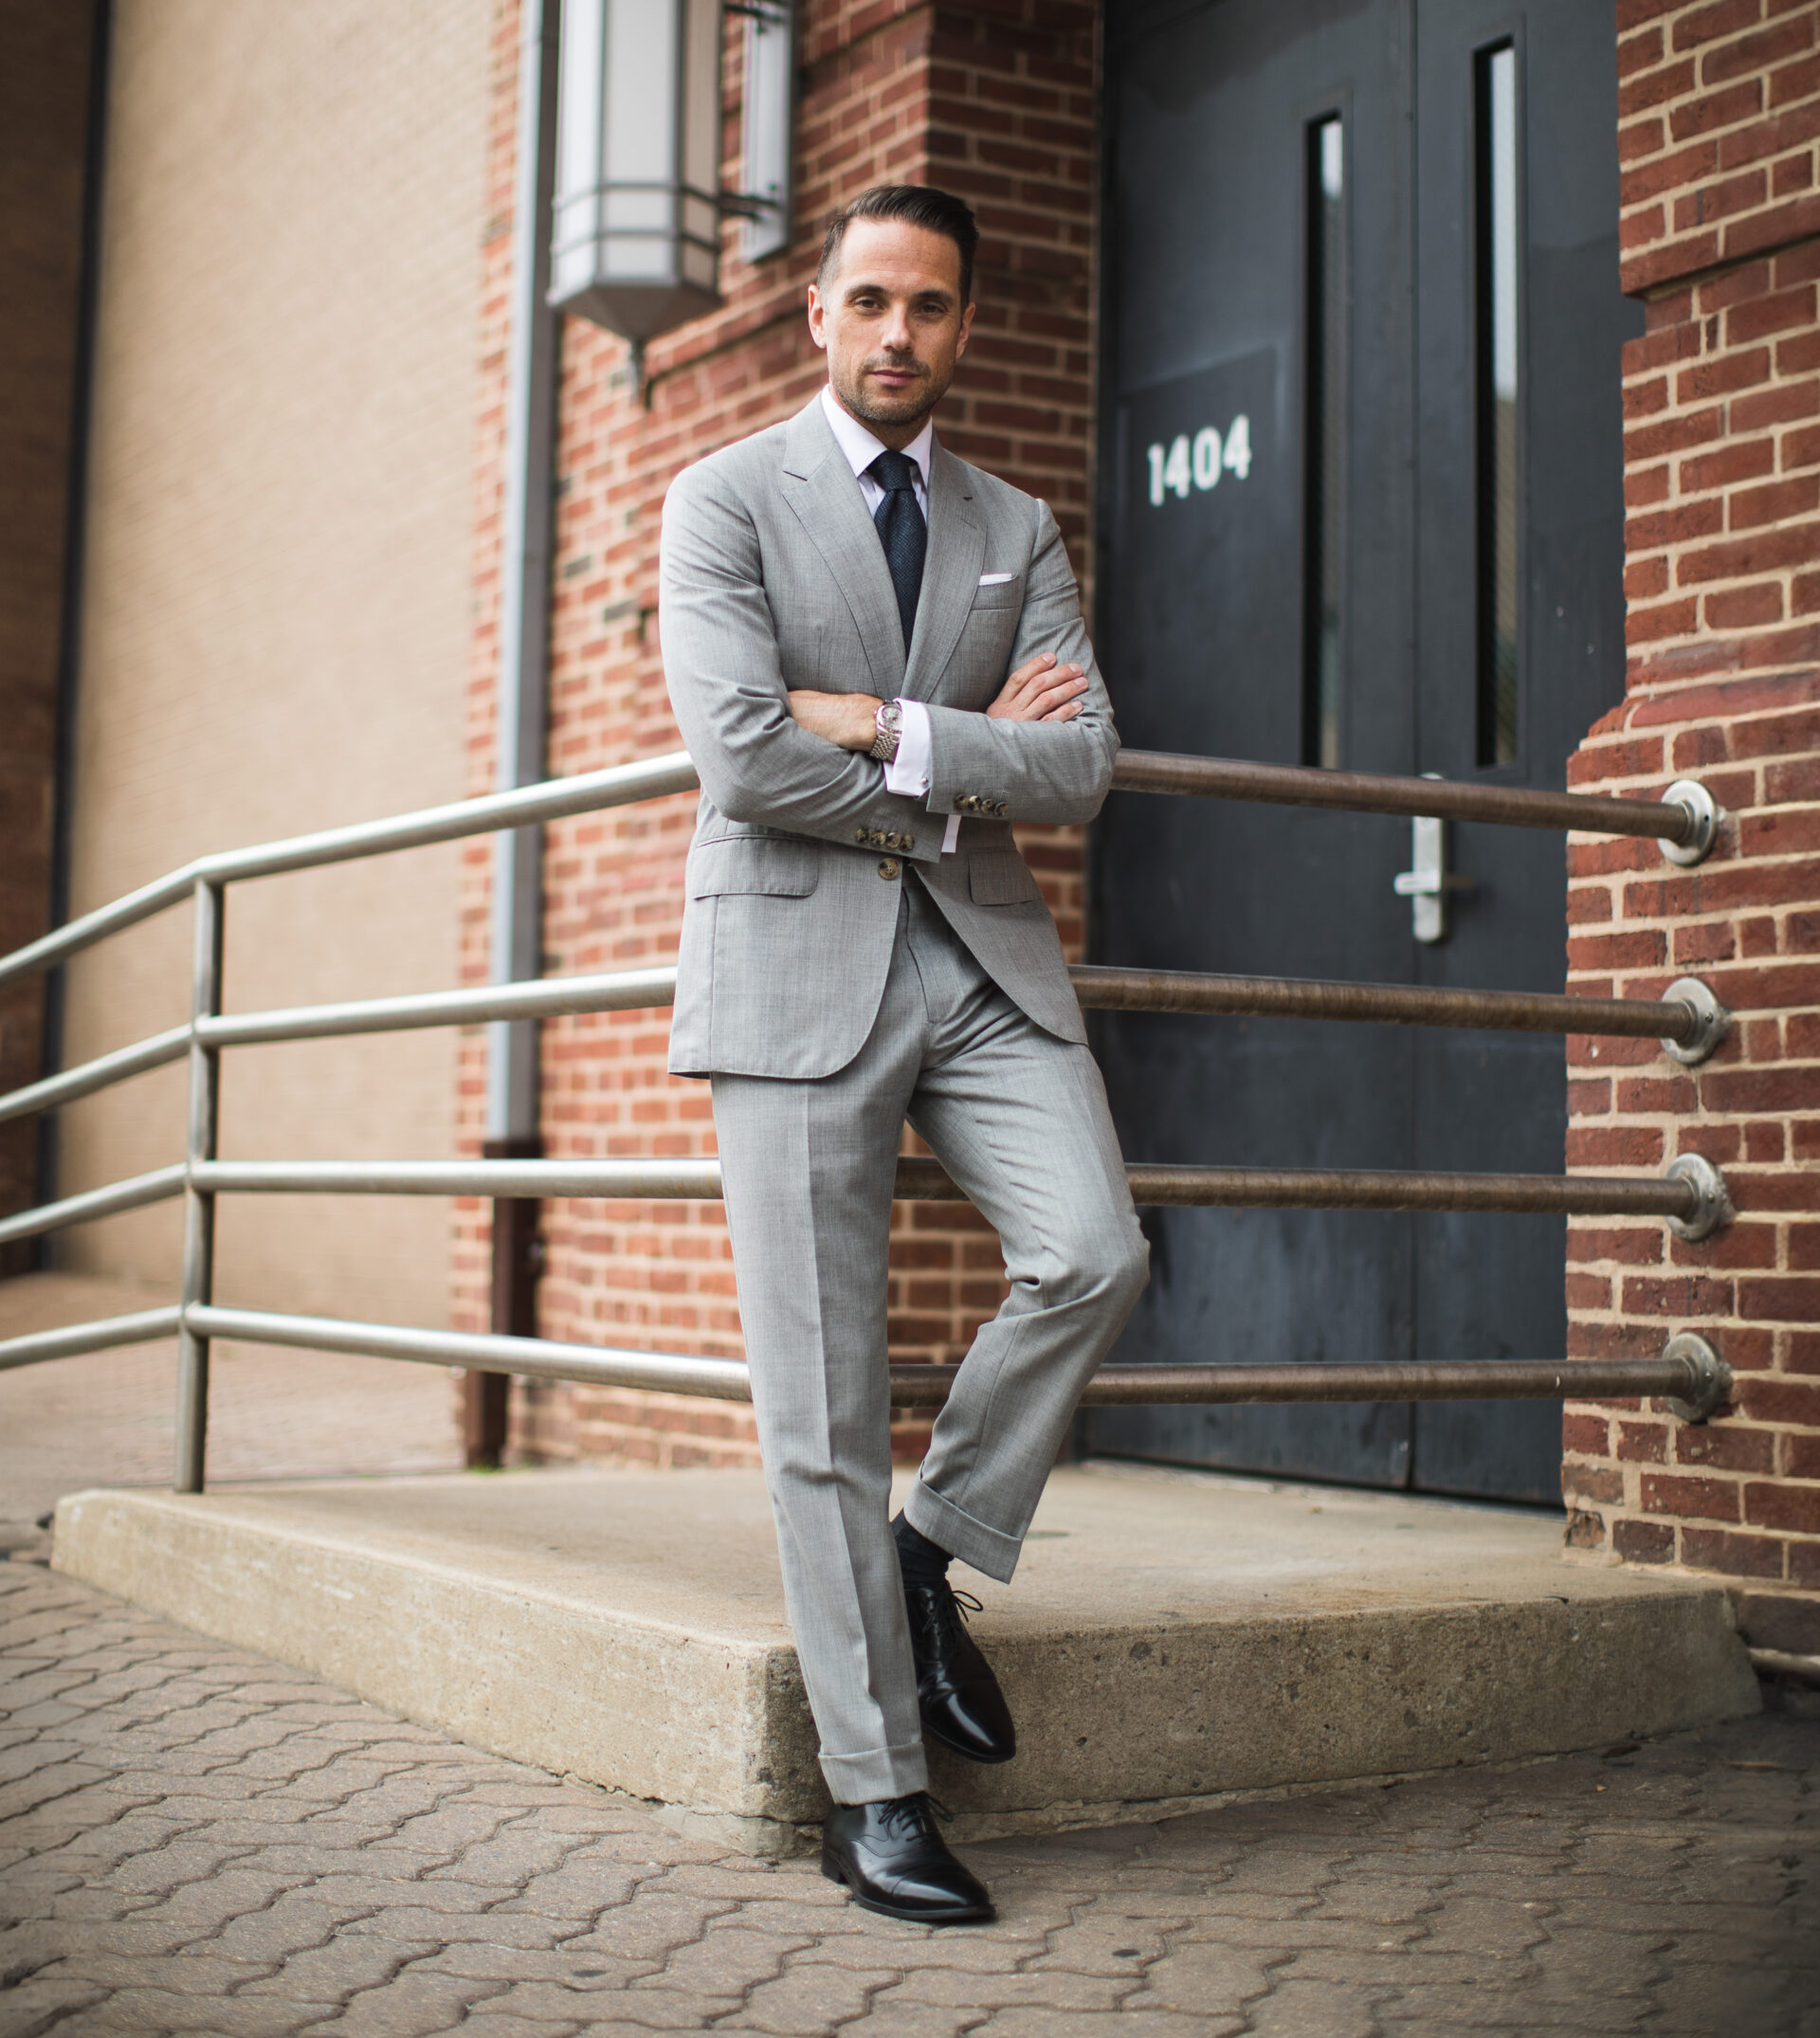 HOW TO WEAR A LIGHT GRAY SUIT - TURNING IT INTO A THREE SEASON OUTFIT –  Custom Men's Suits in Langley, Abbotsford & Online